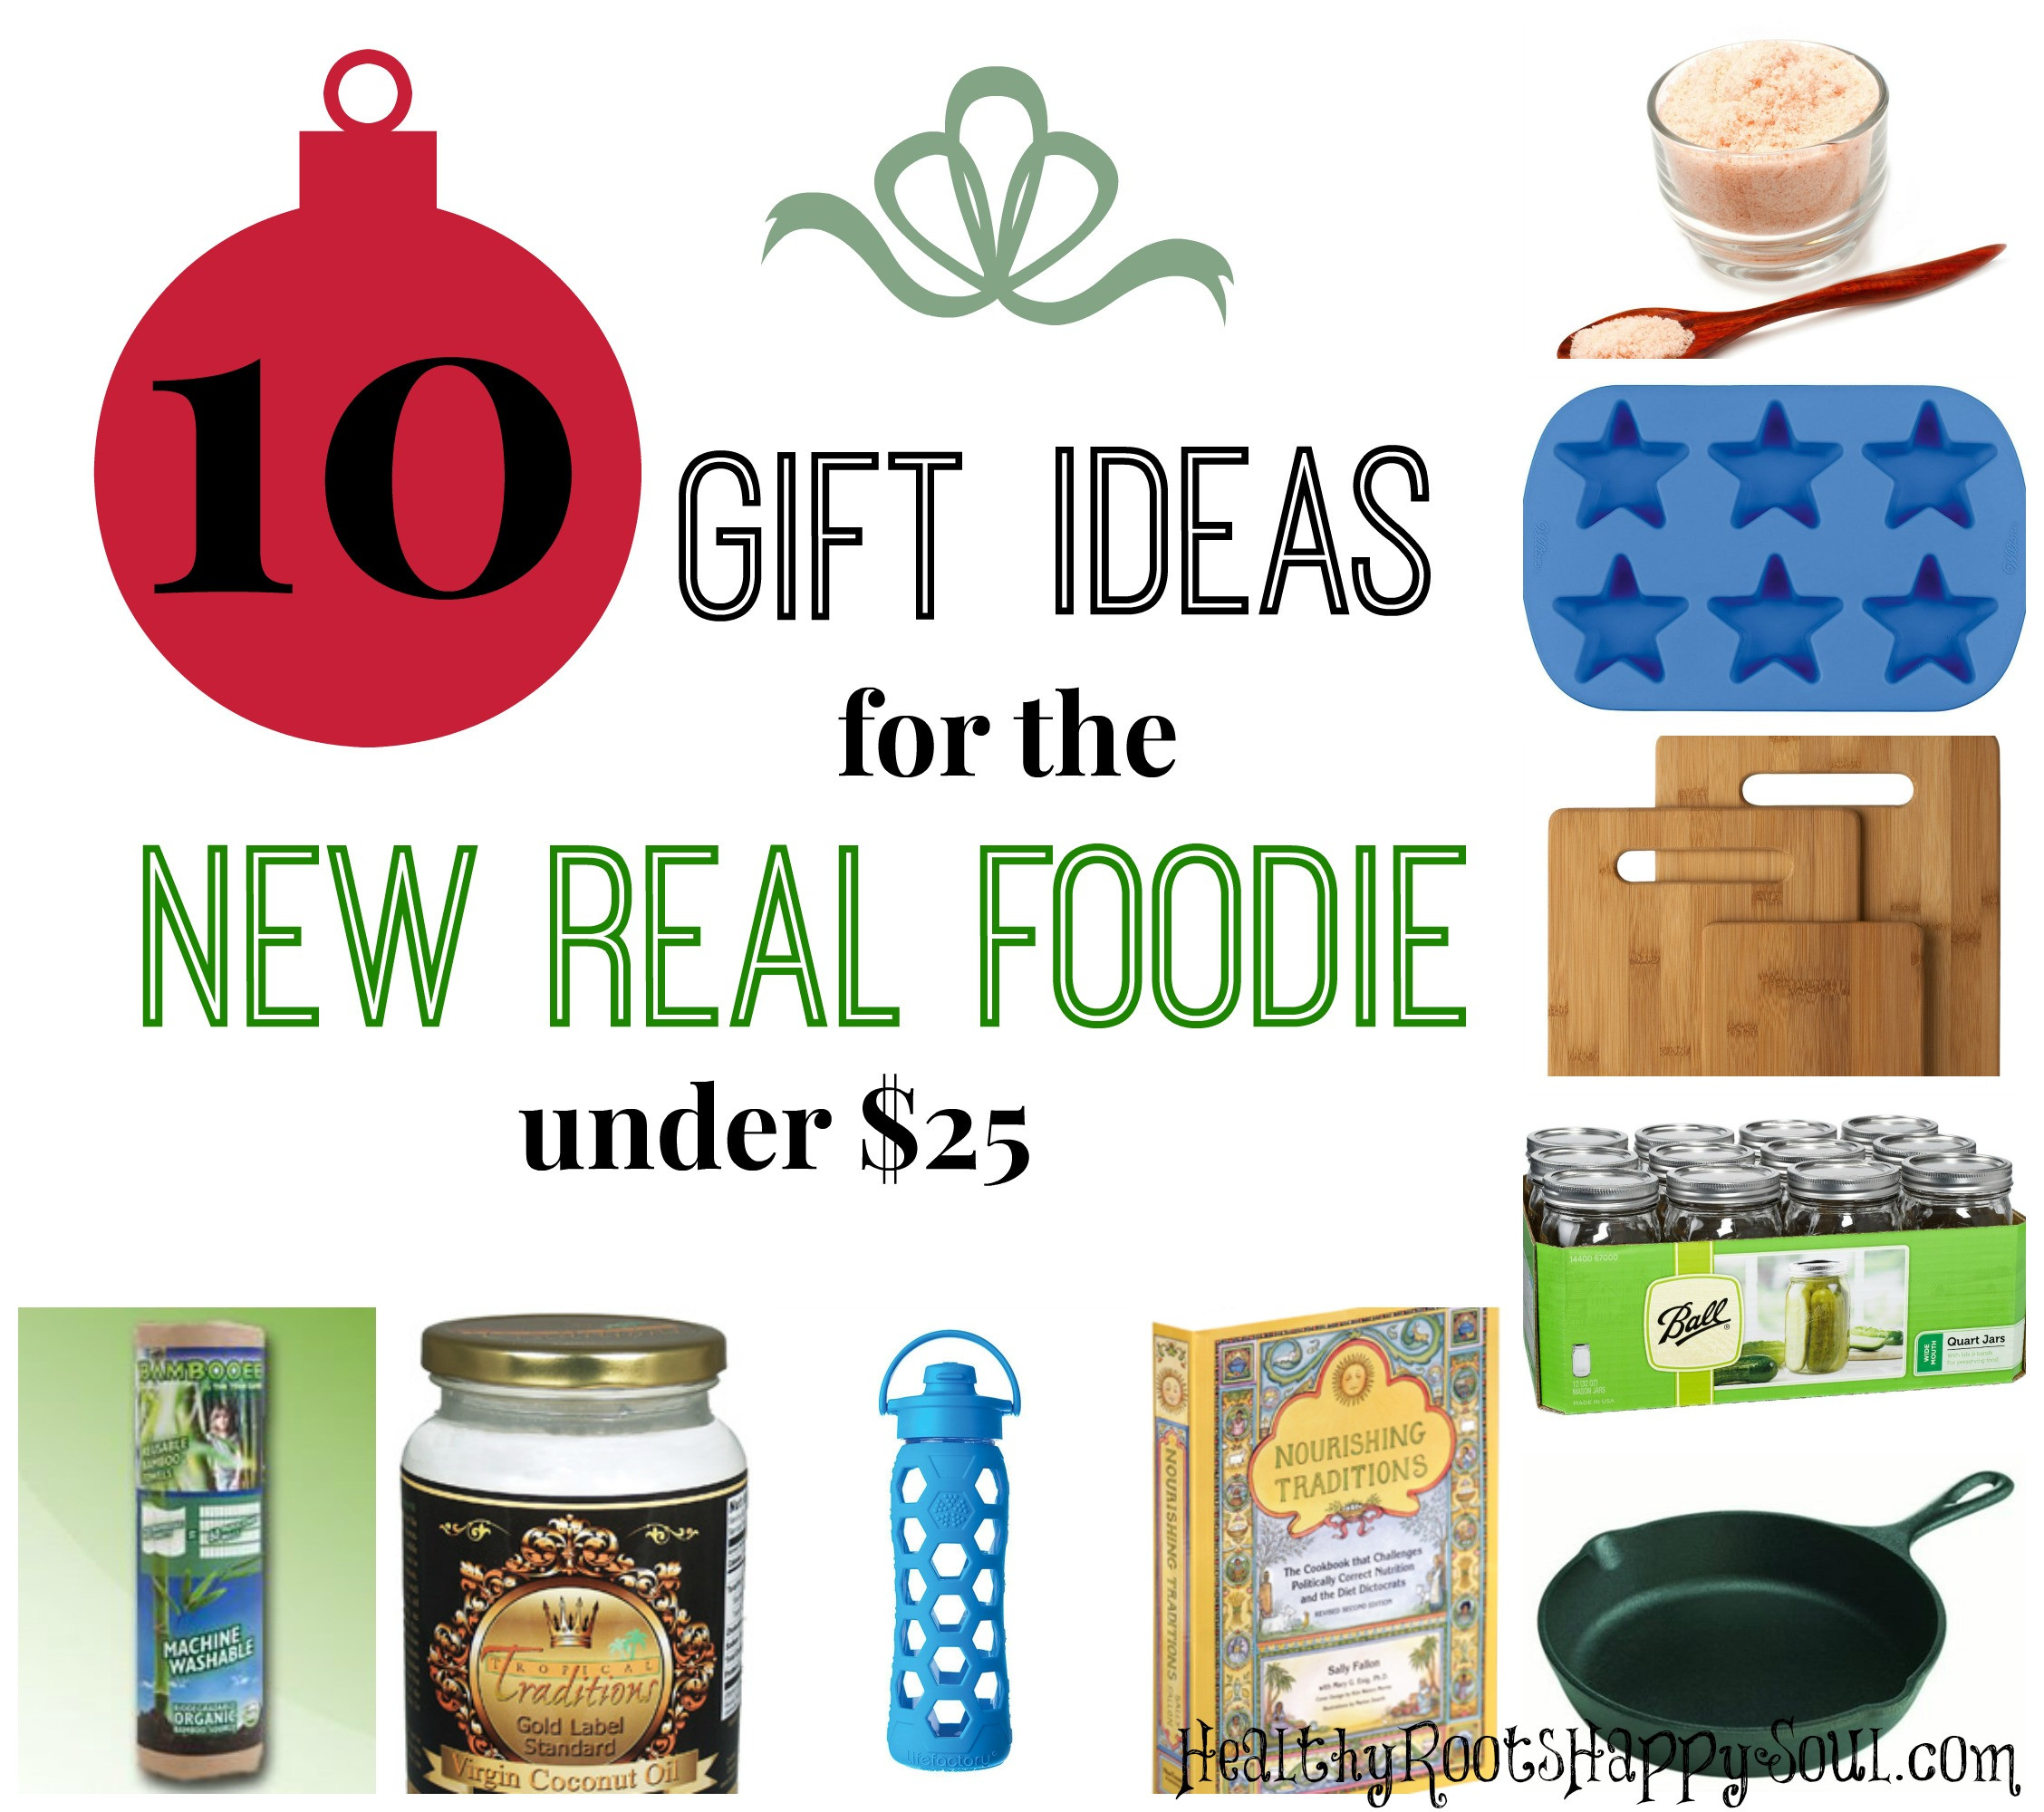 Holiday Gift Ideas Under $25
 Naturally Loriel 10 Gift Ideas for the NEW Real Foo